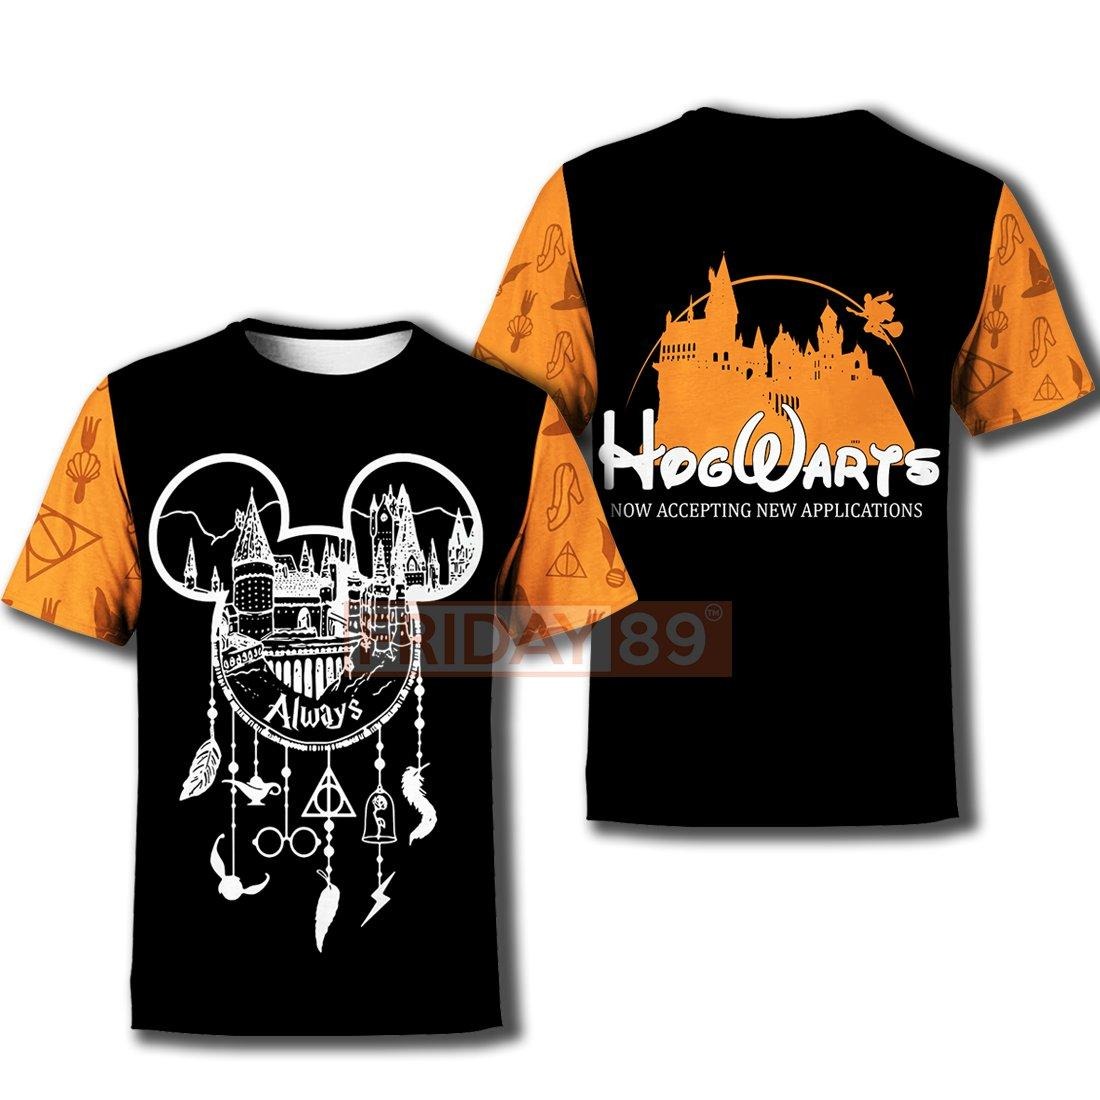 Hogwarts always dreamcatcher now accepting new appilcation 3d hoodie and t-shirt